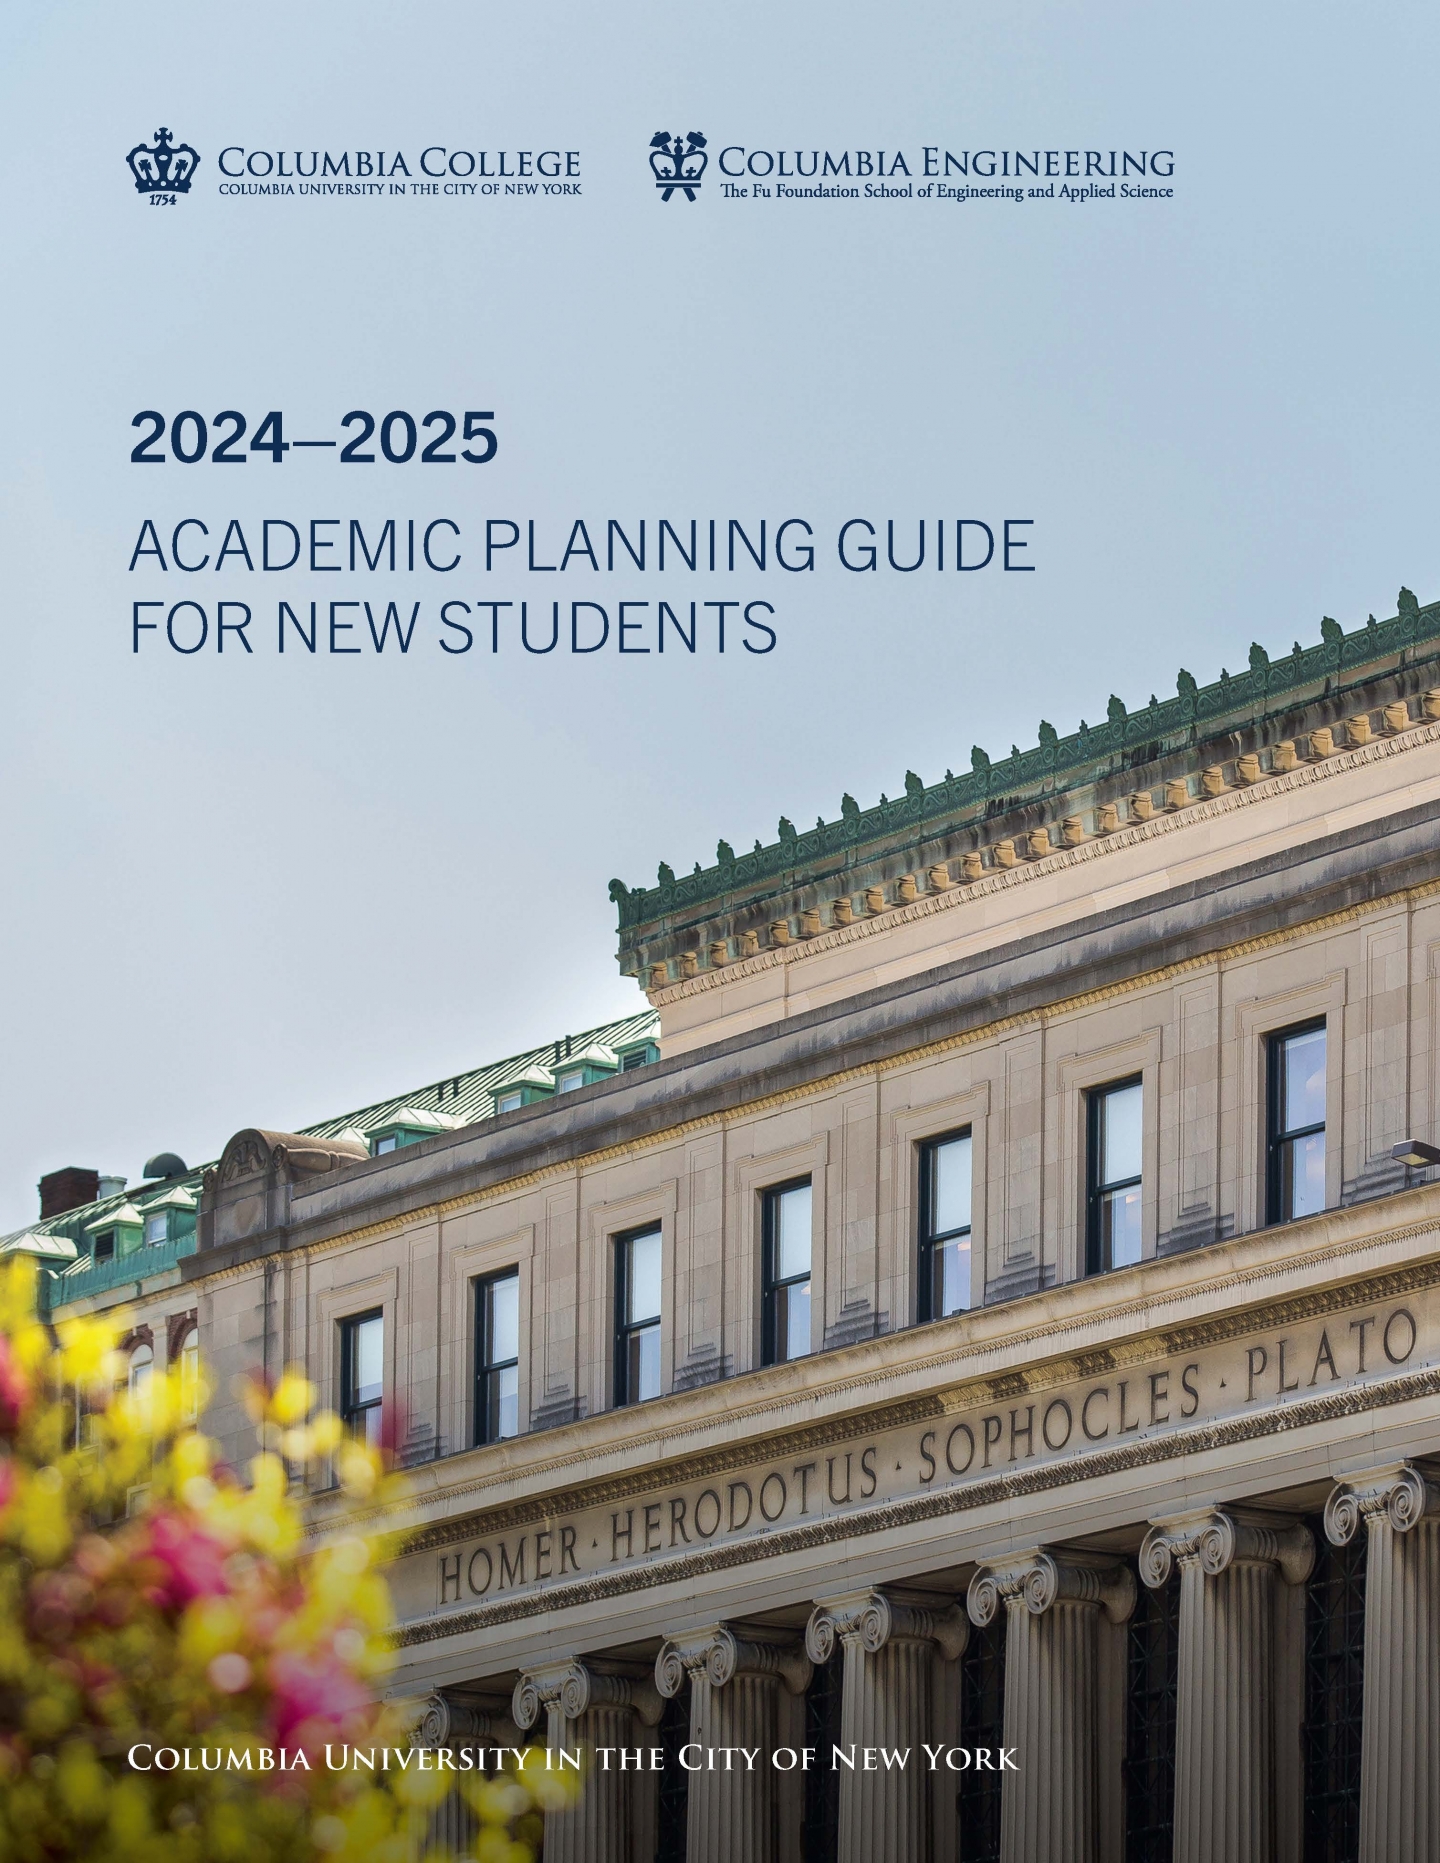 2024-2025 Academic Planning Guide for New Students